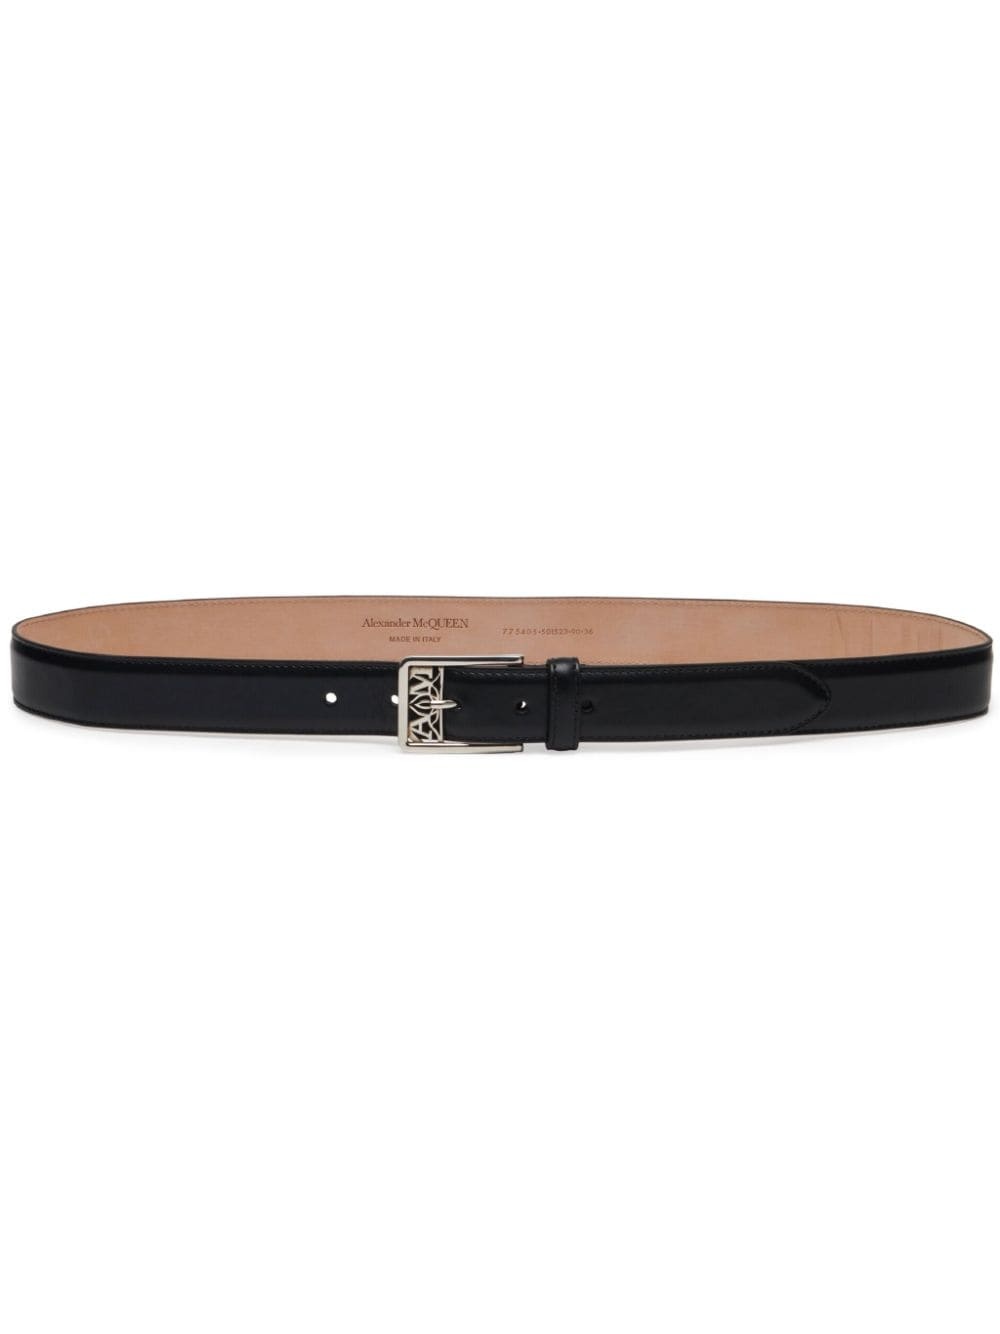 The Seal buckle belt - 1